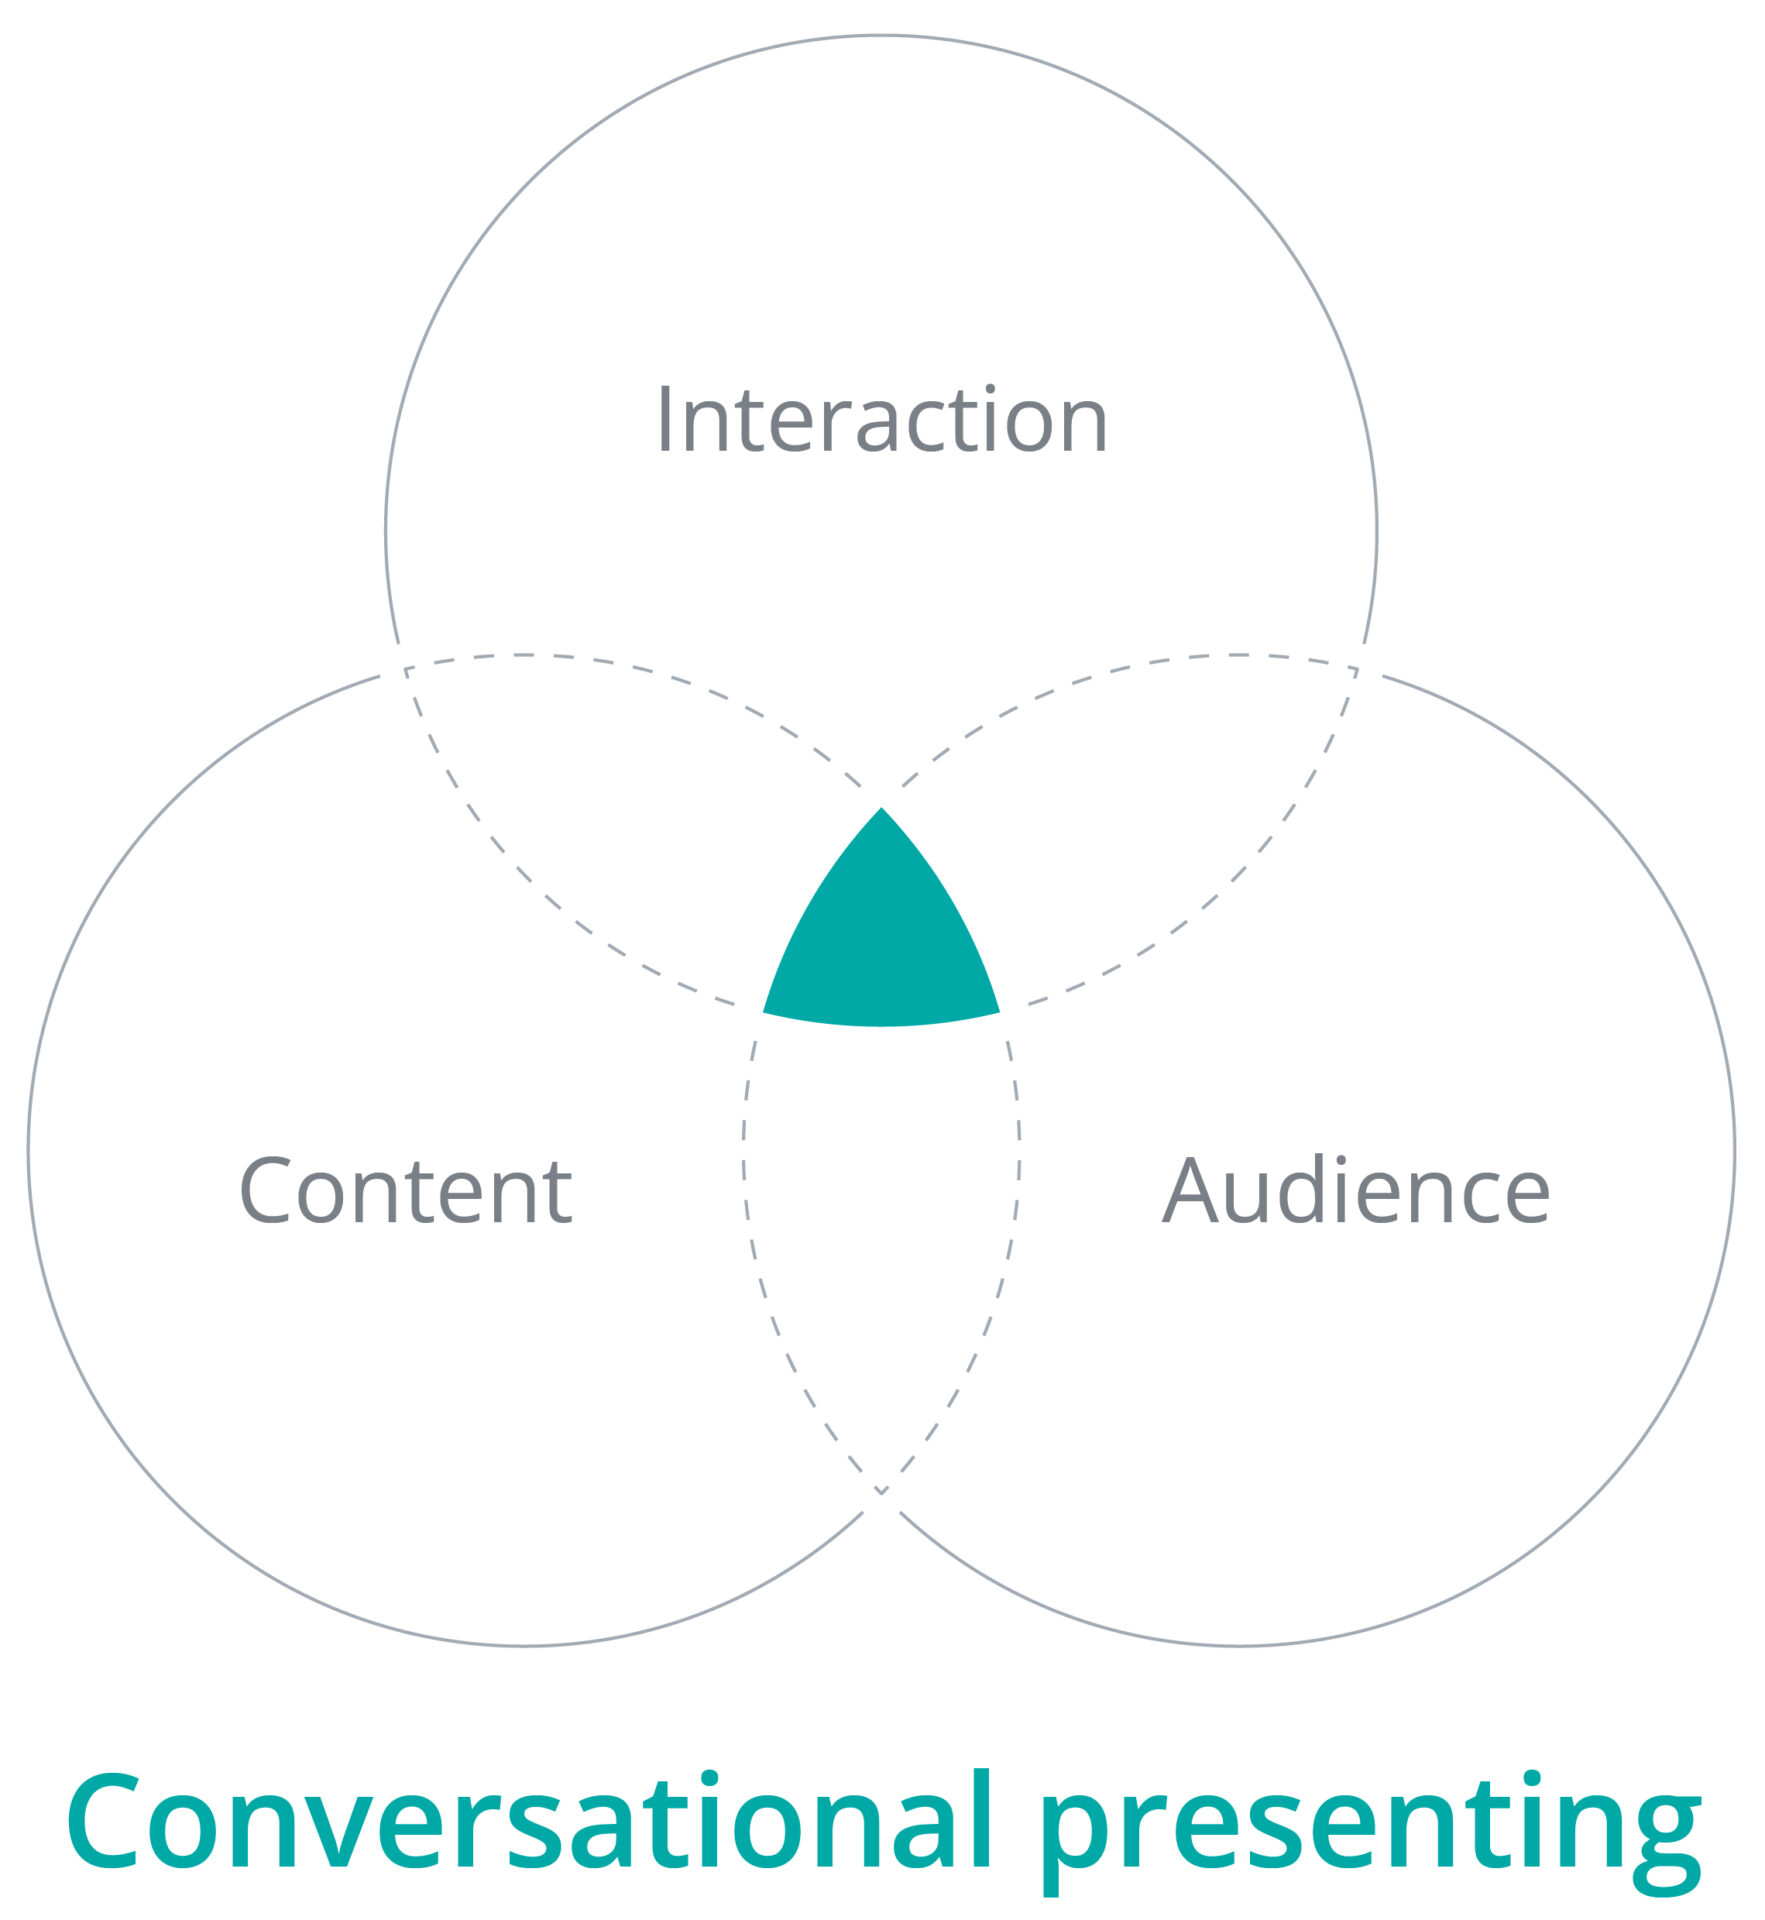 A ven diagram with content, audience, and interaction.